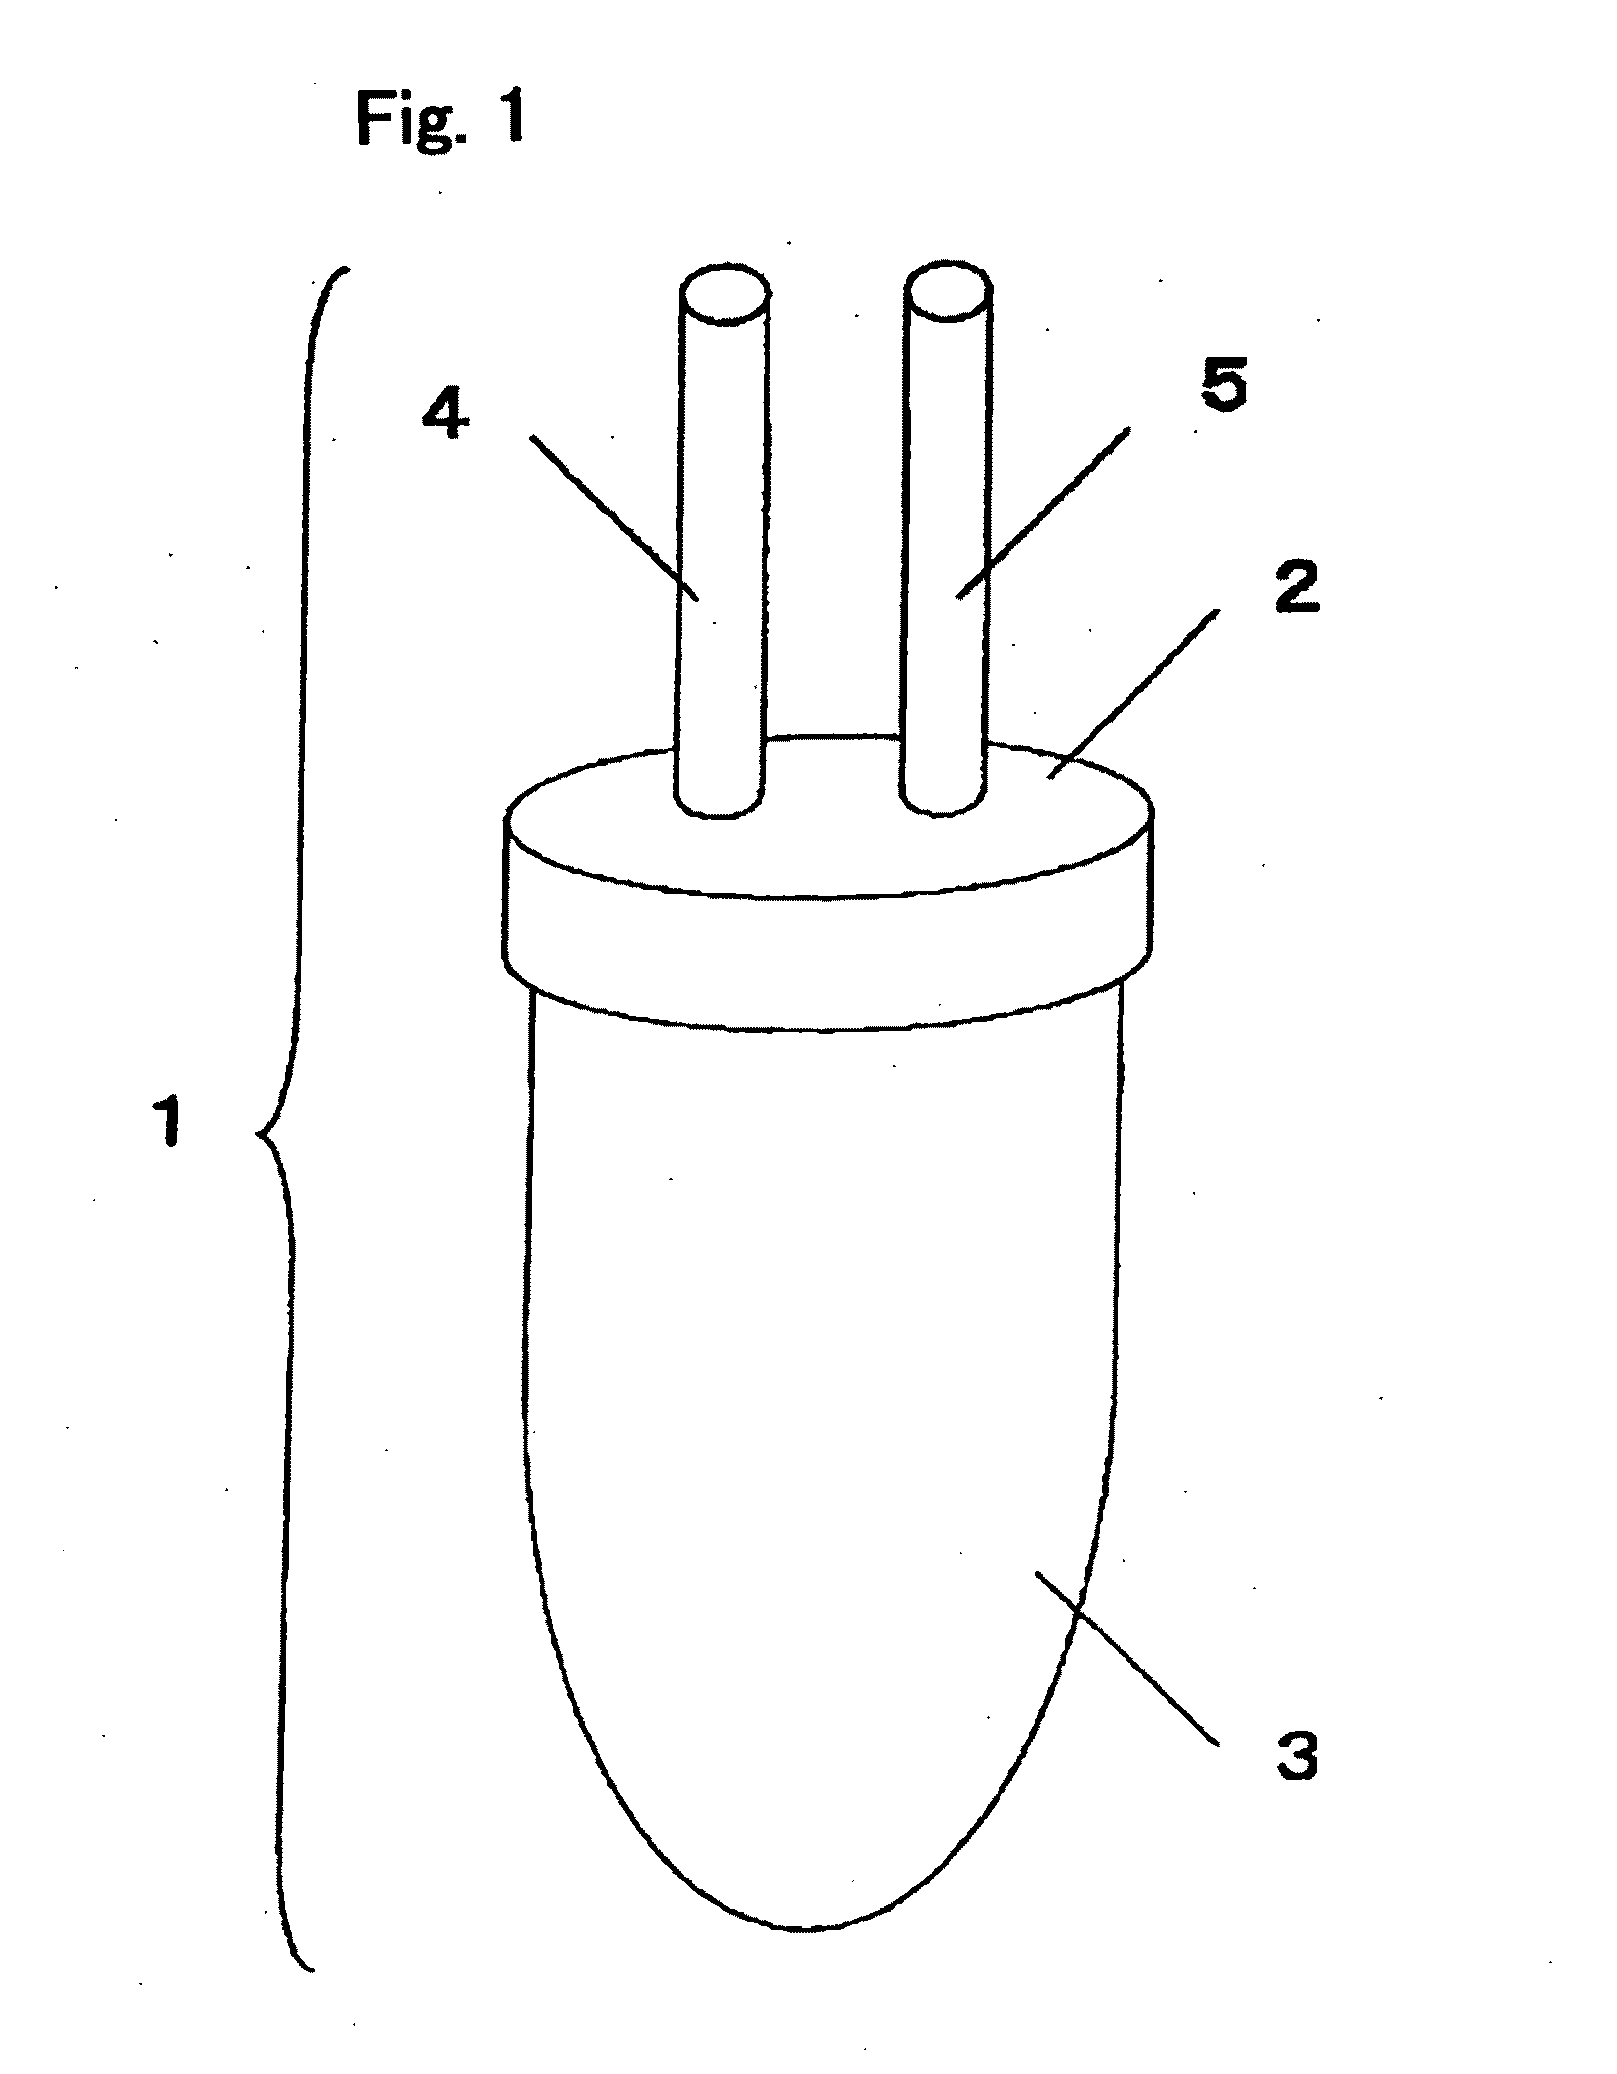 Method for Detecting Disease-Related Marker Using Gastric Mucosal Lavage Fluid